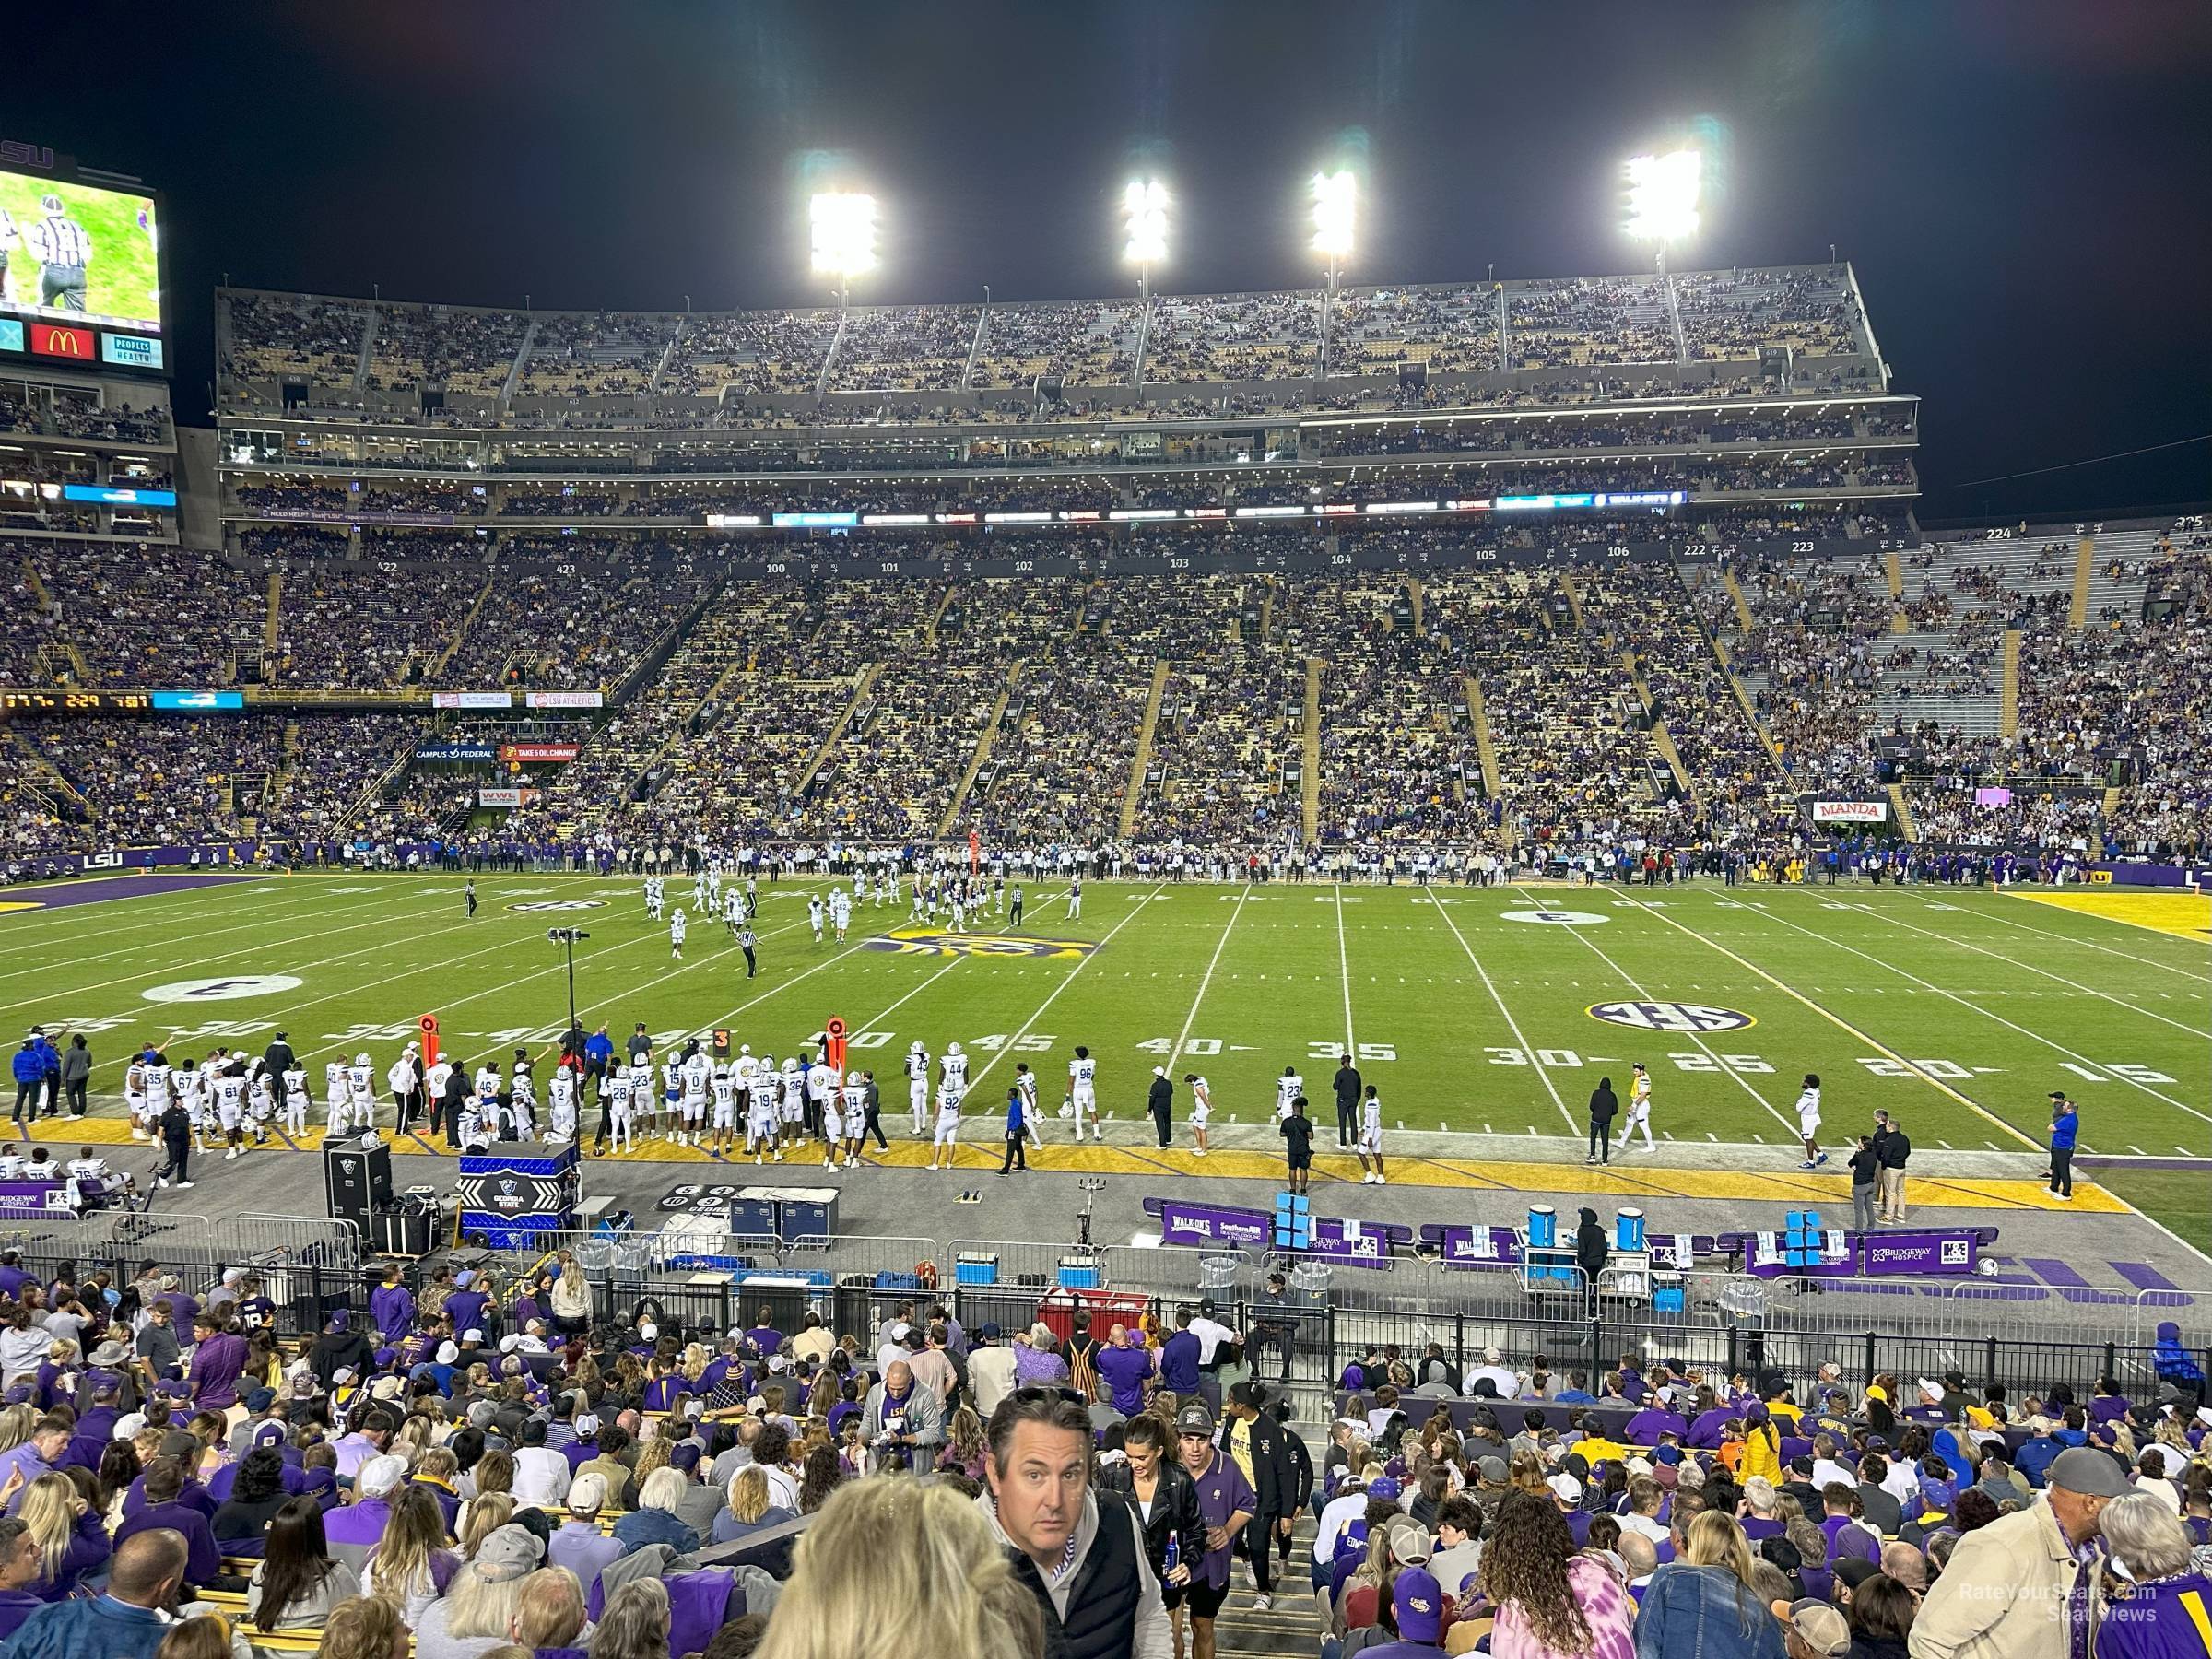 section 302, row 23 seat view  - tiger stadium